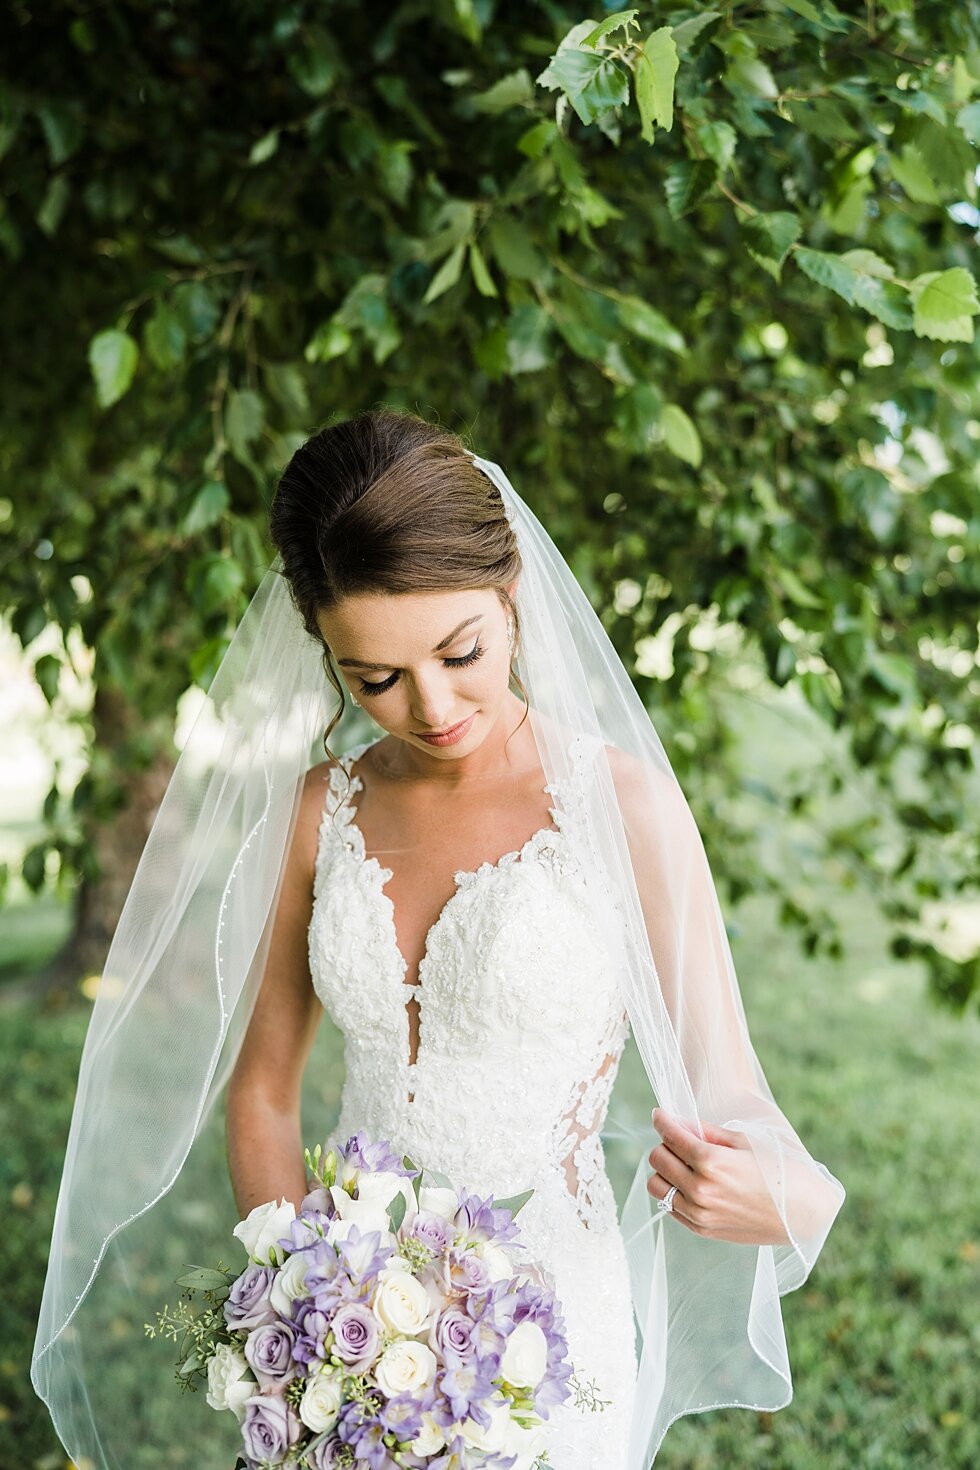  Stunning bridal photos with lavender bridal bouquet hours before she walks down the aisle to get married to the love of her life. wedding ceremony details stunning photography married midwest louisville kentucky #weddingphoto #love #justmarried #mid